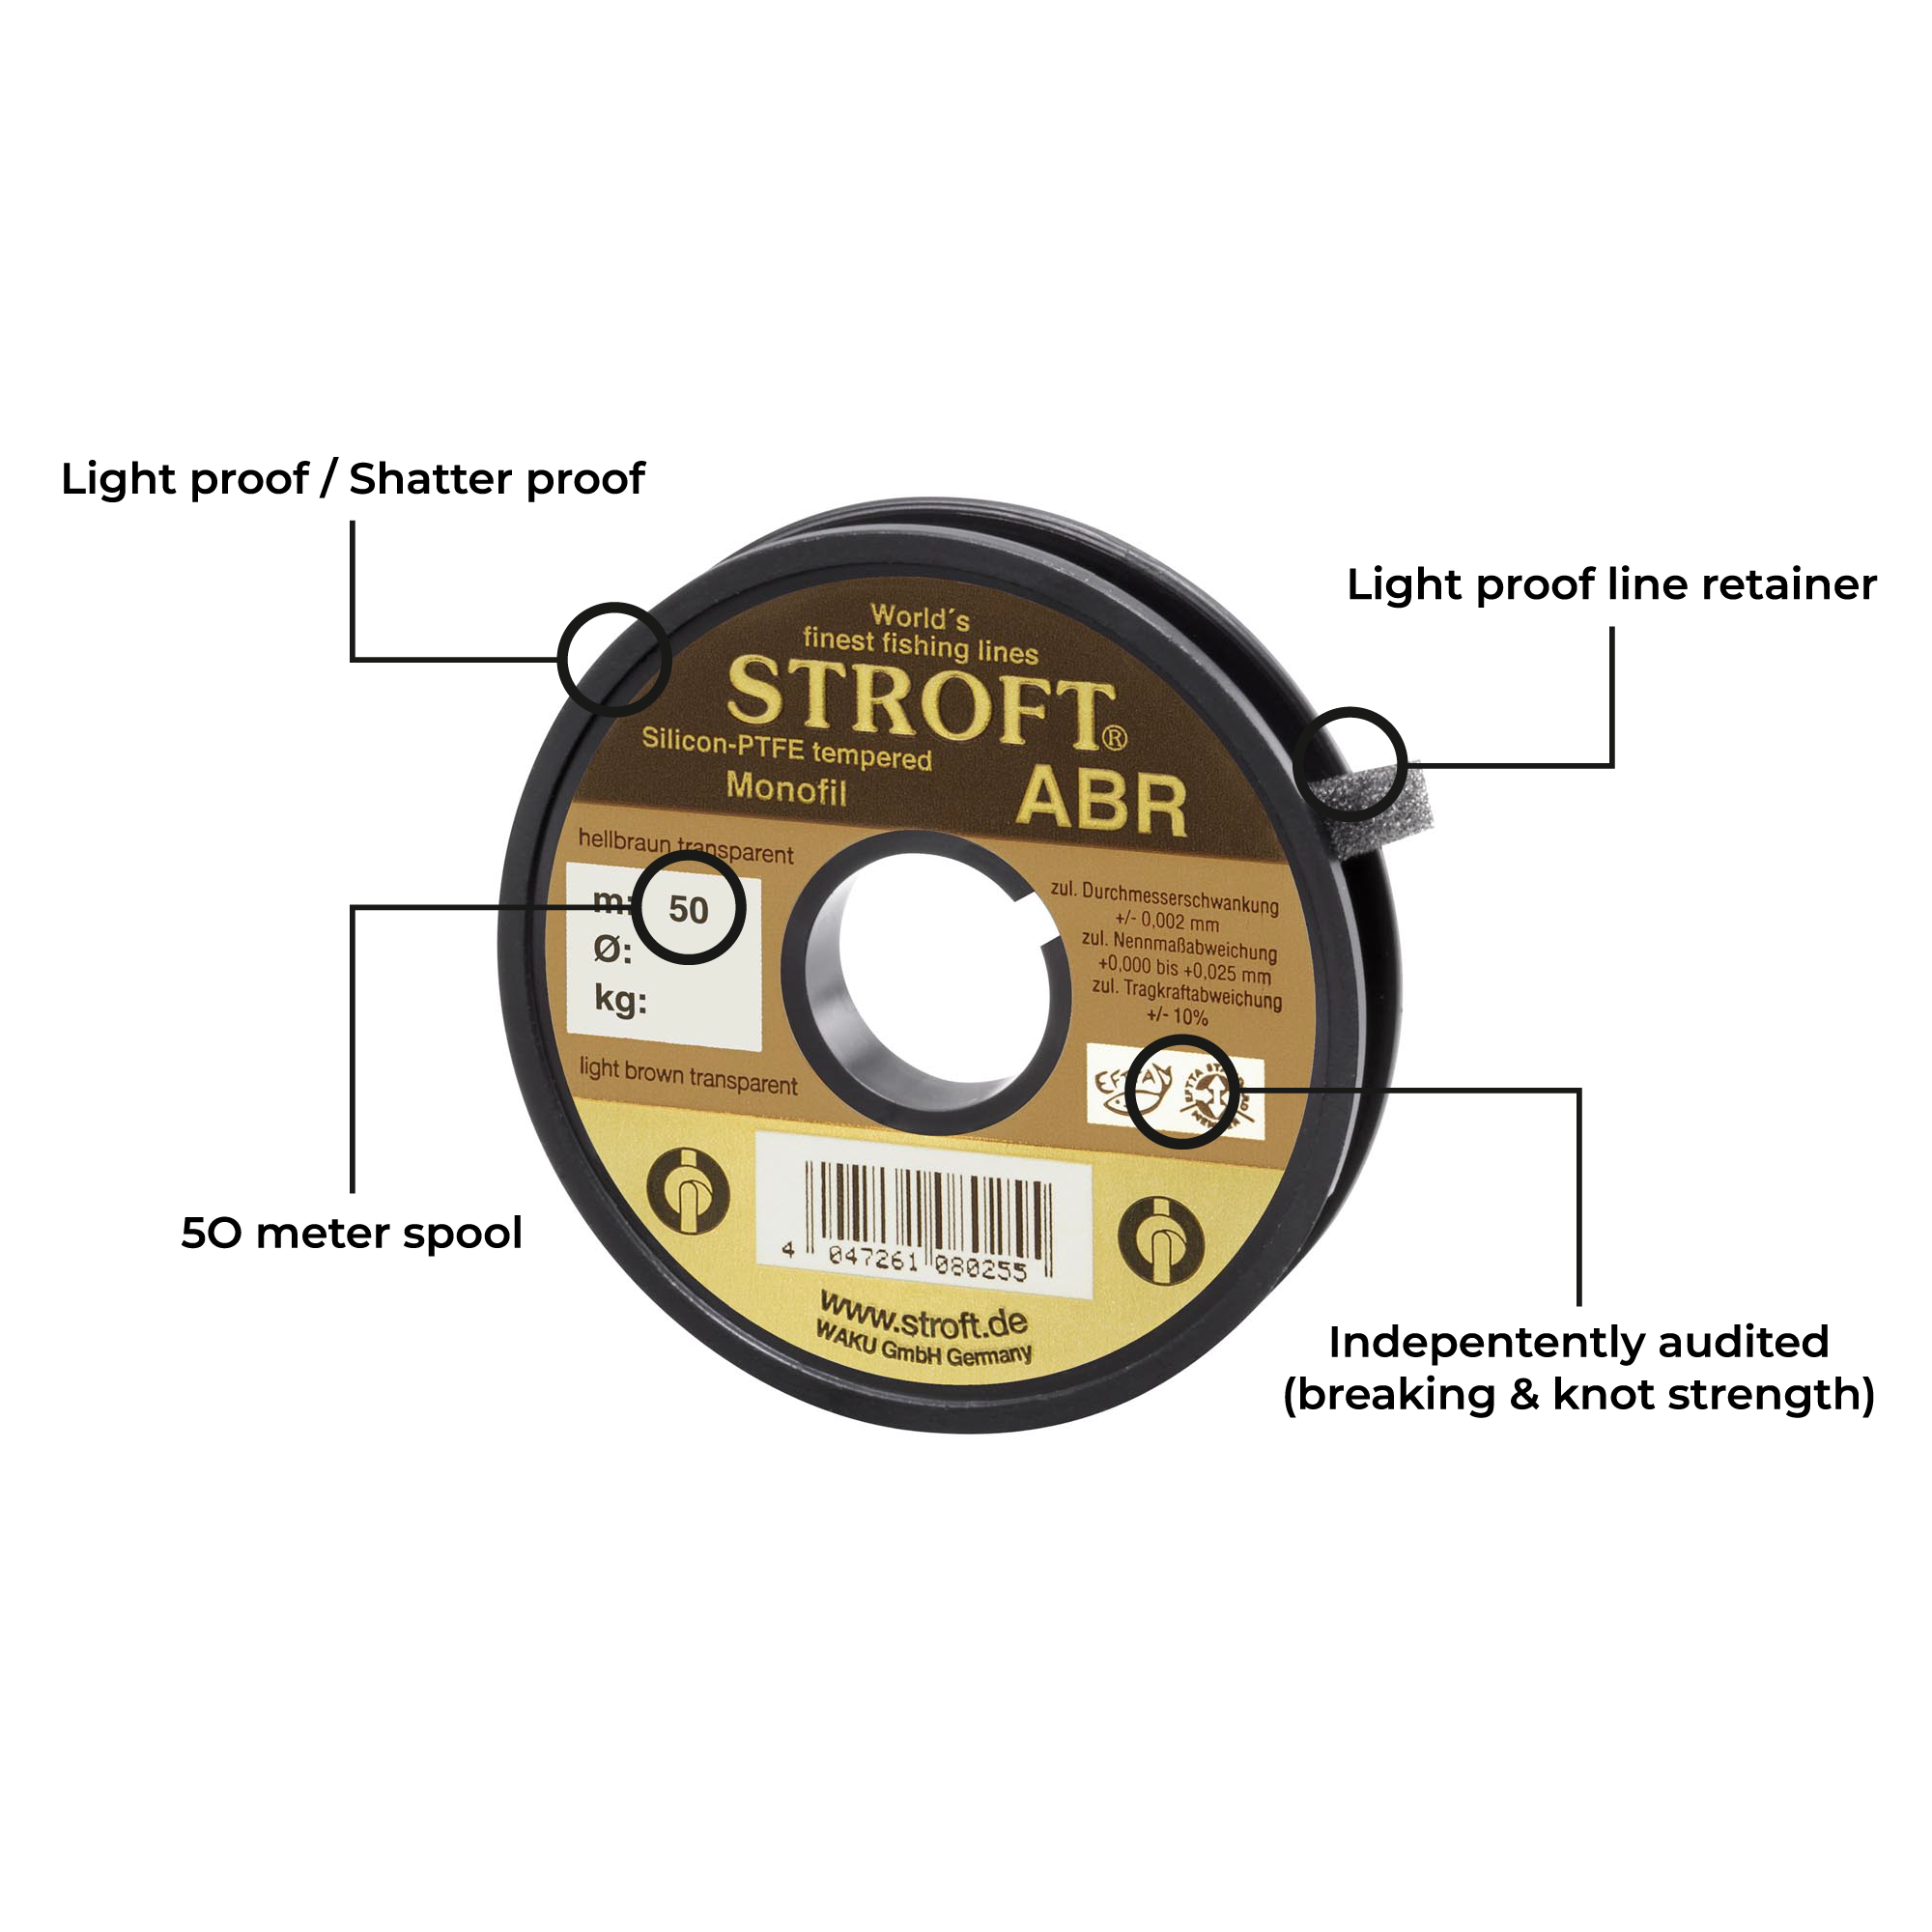 Stroft Tippet Material  Best Fly Fishing Tippet Material.